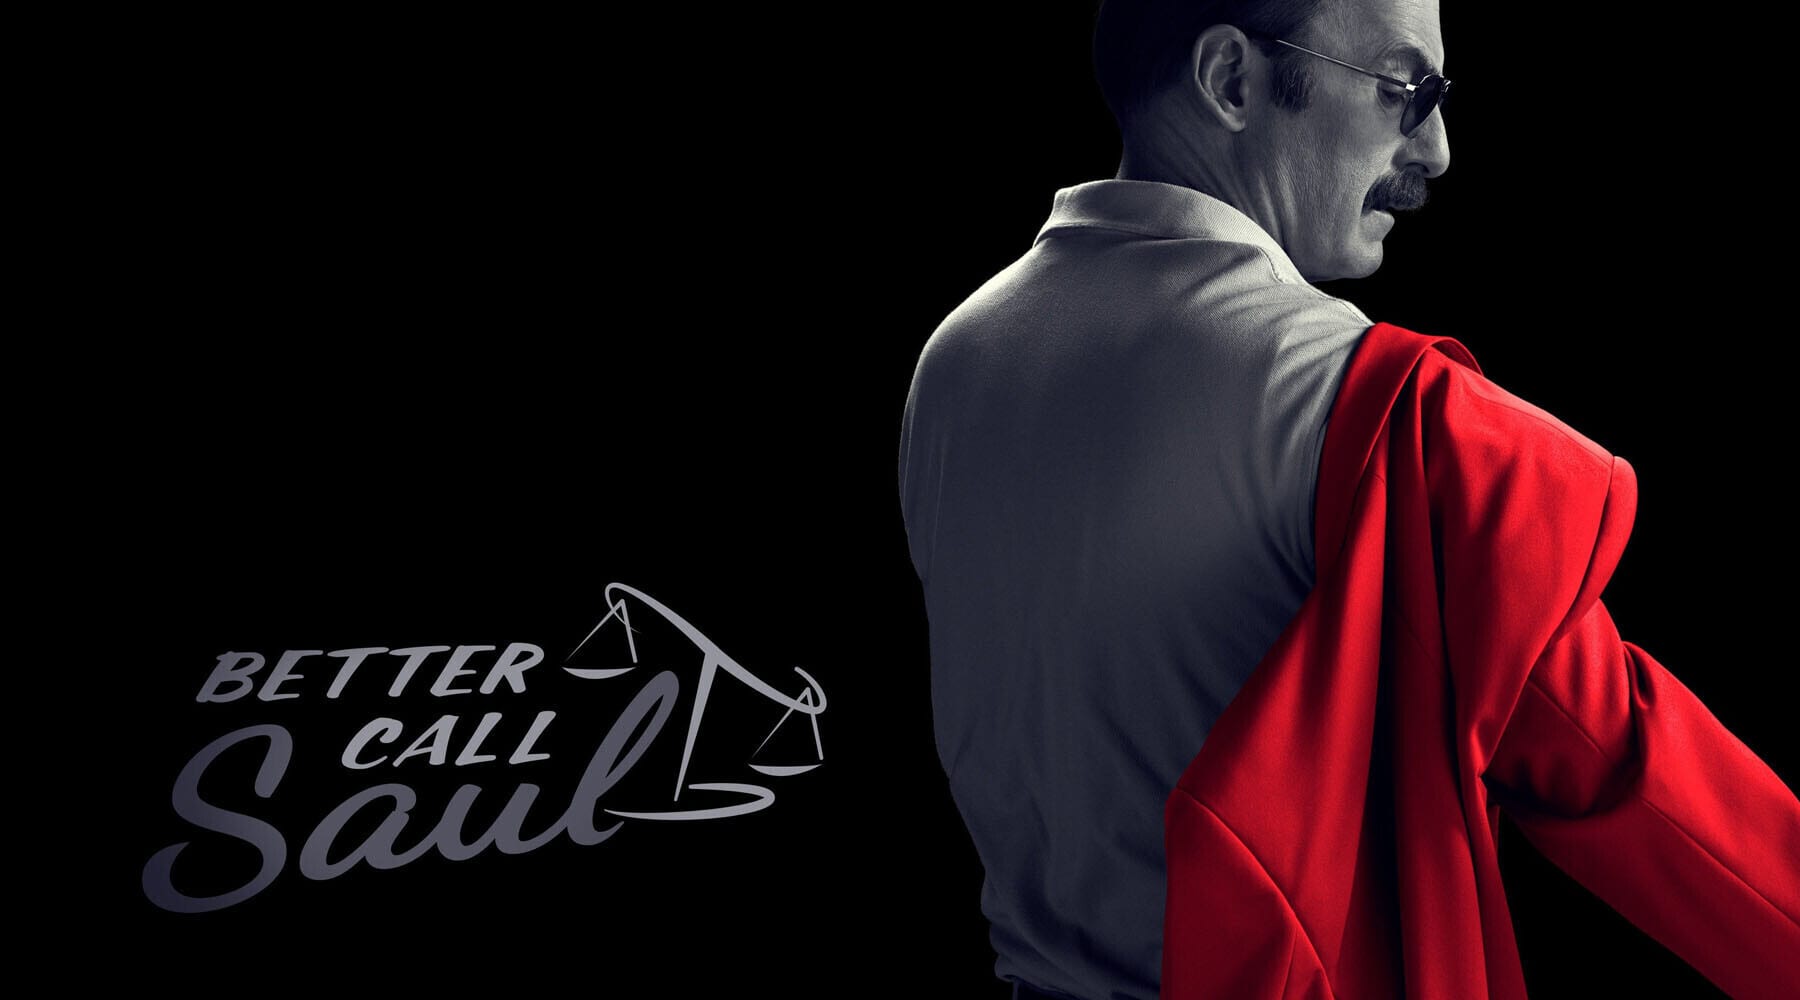 Better Call Saul | Sony Pictures